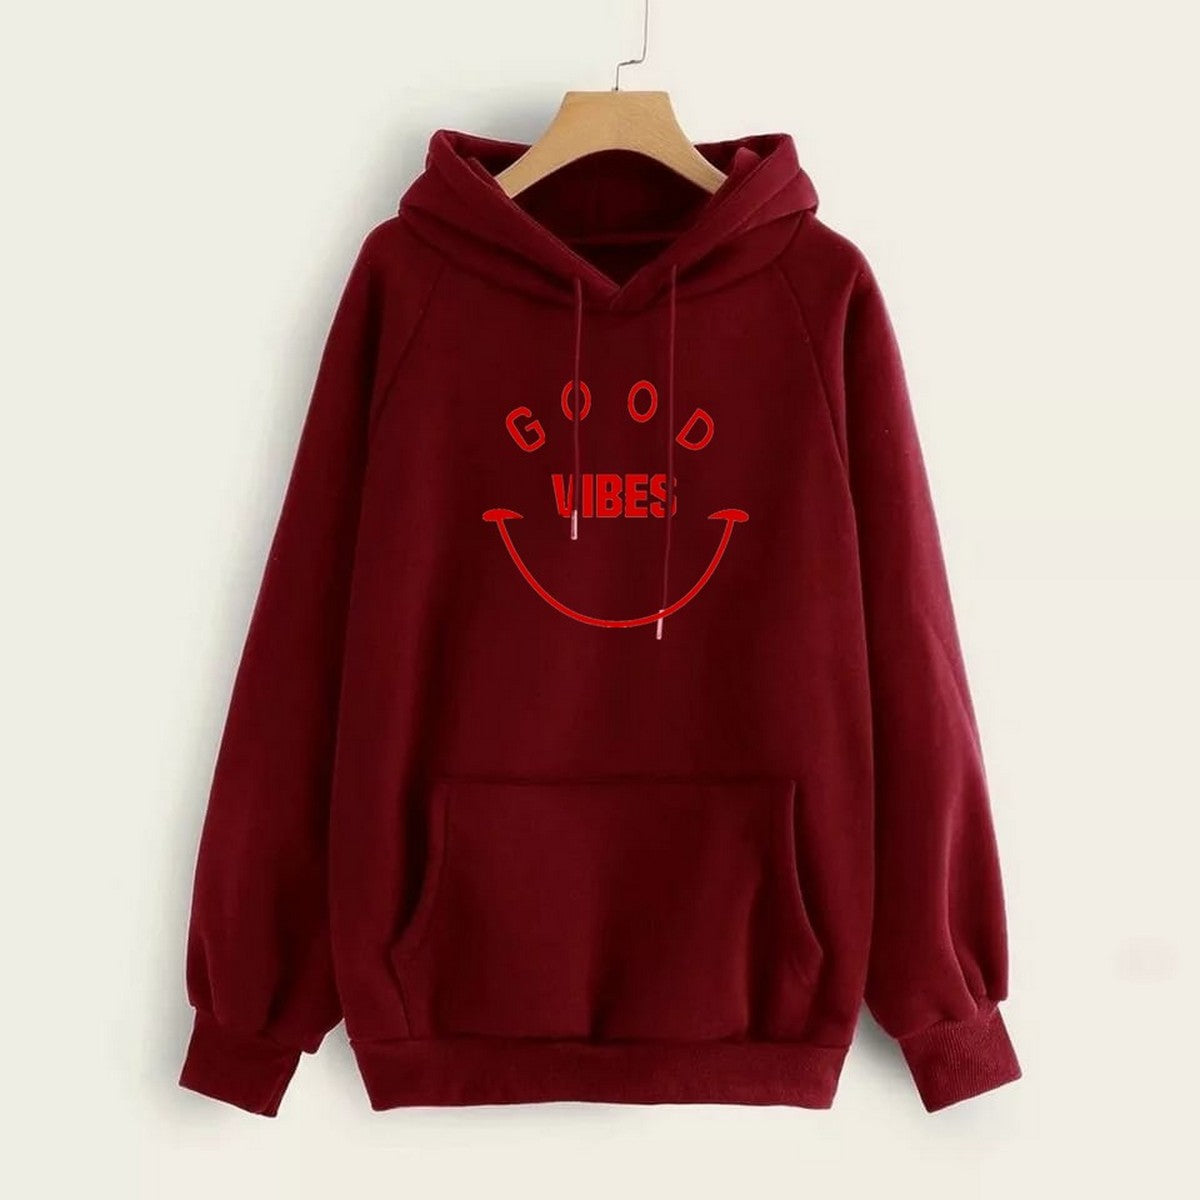 Good Vibes Printed Fleece Full Sleeves Pull Over Hoodie For Men And Women